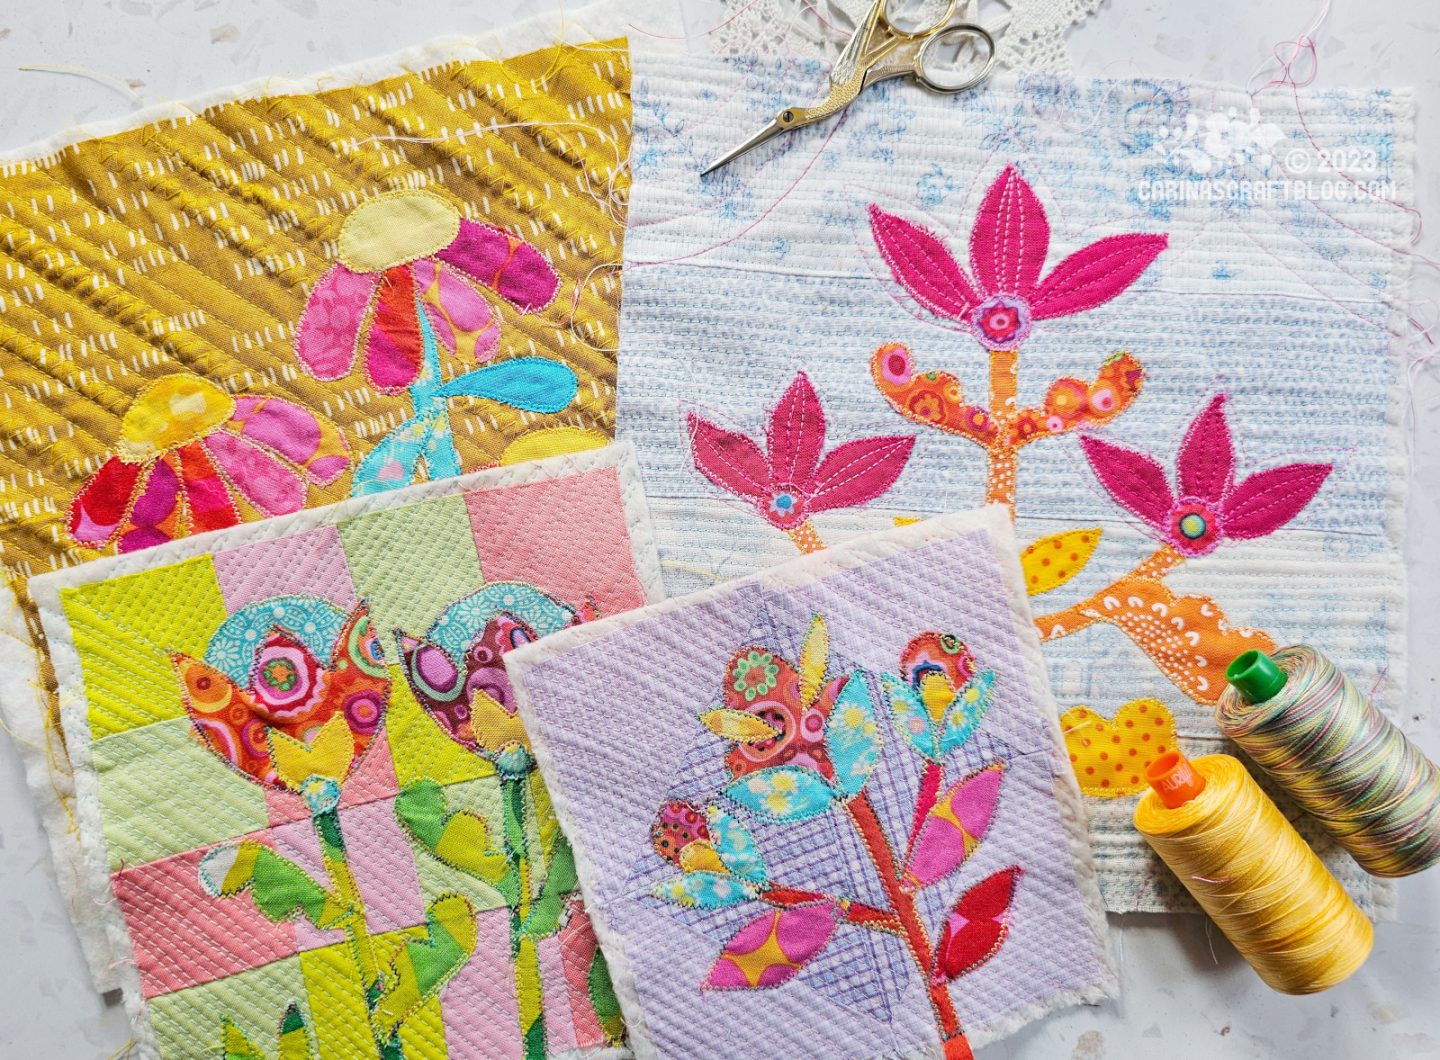 Sew Some Summer Fun!  Paper embroidery, Embroidery cards